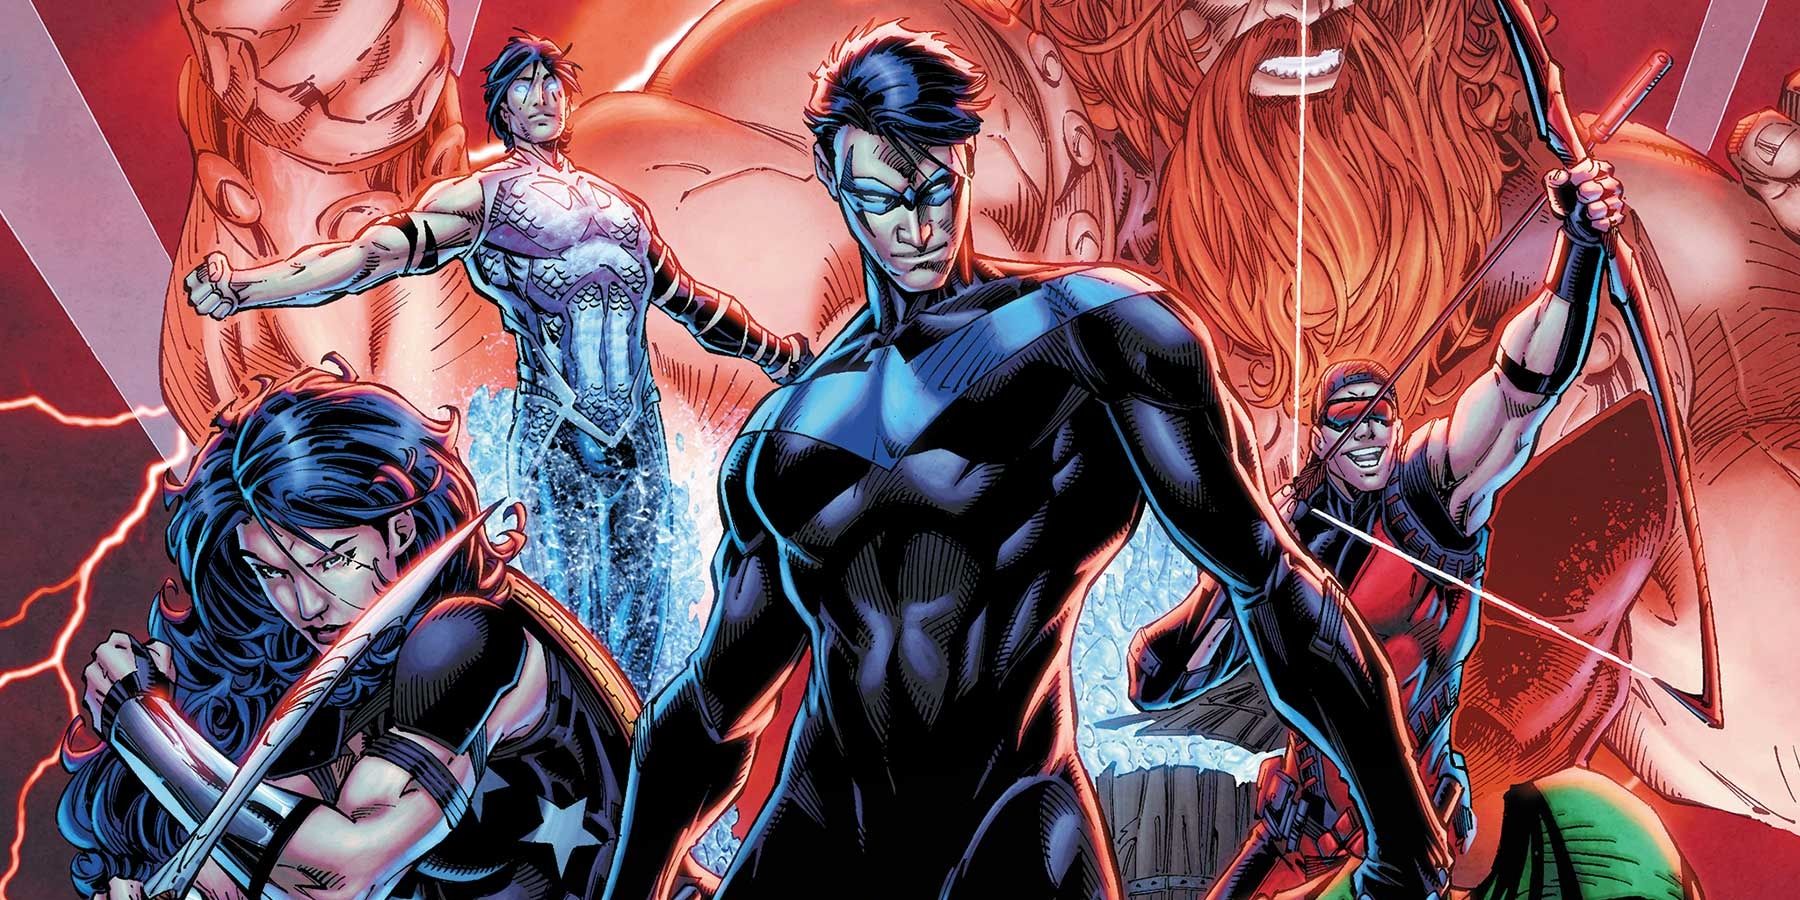 Teen Titans Rebirth: Nightwing and the Titans prepare for battle.